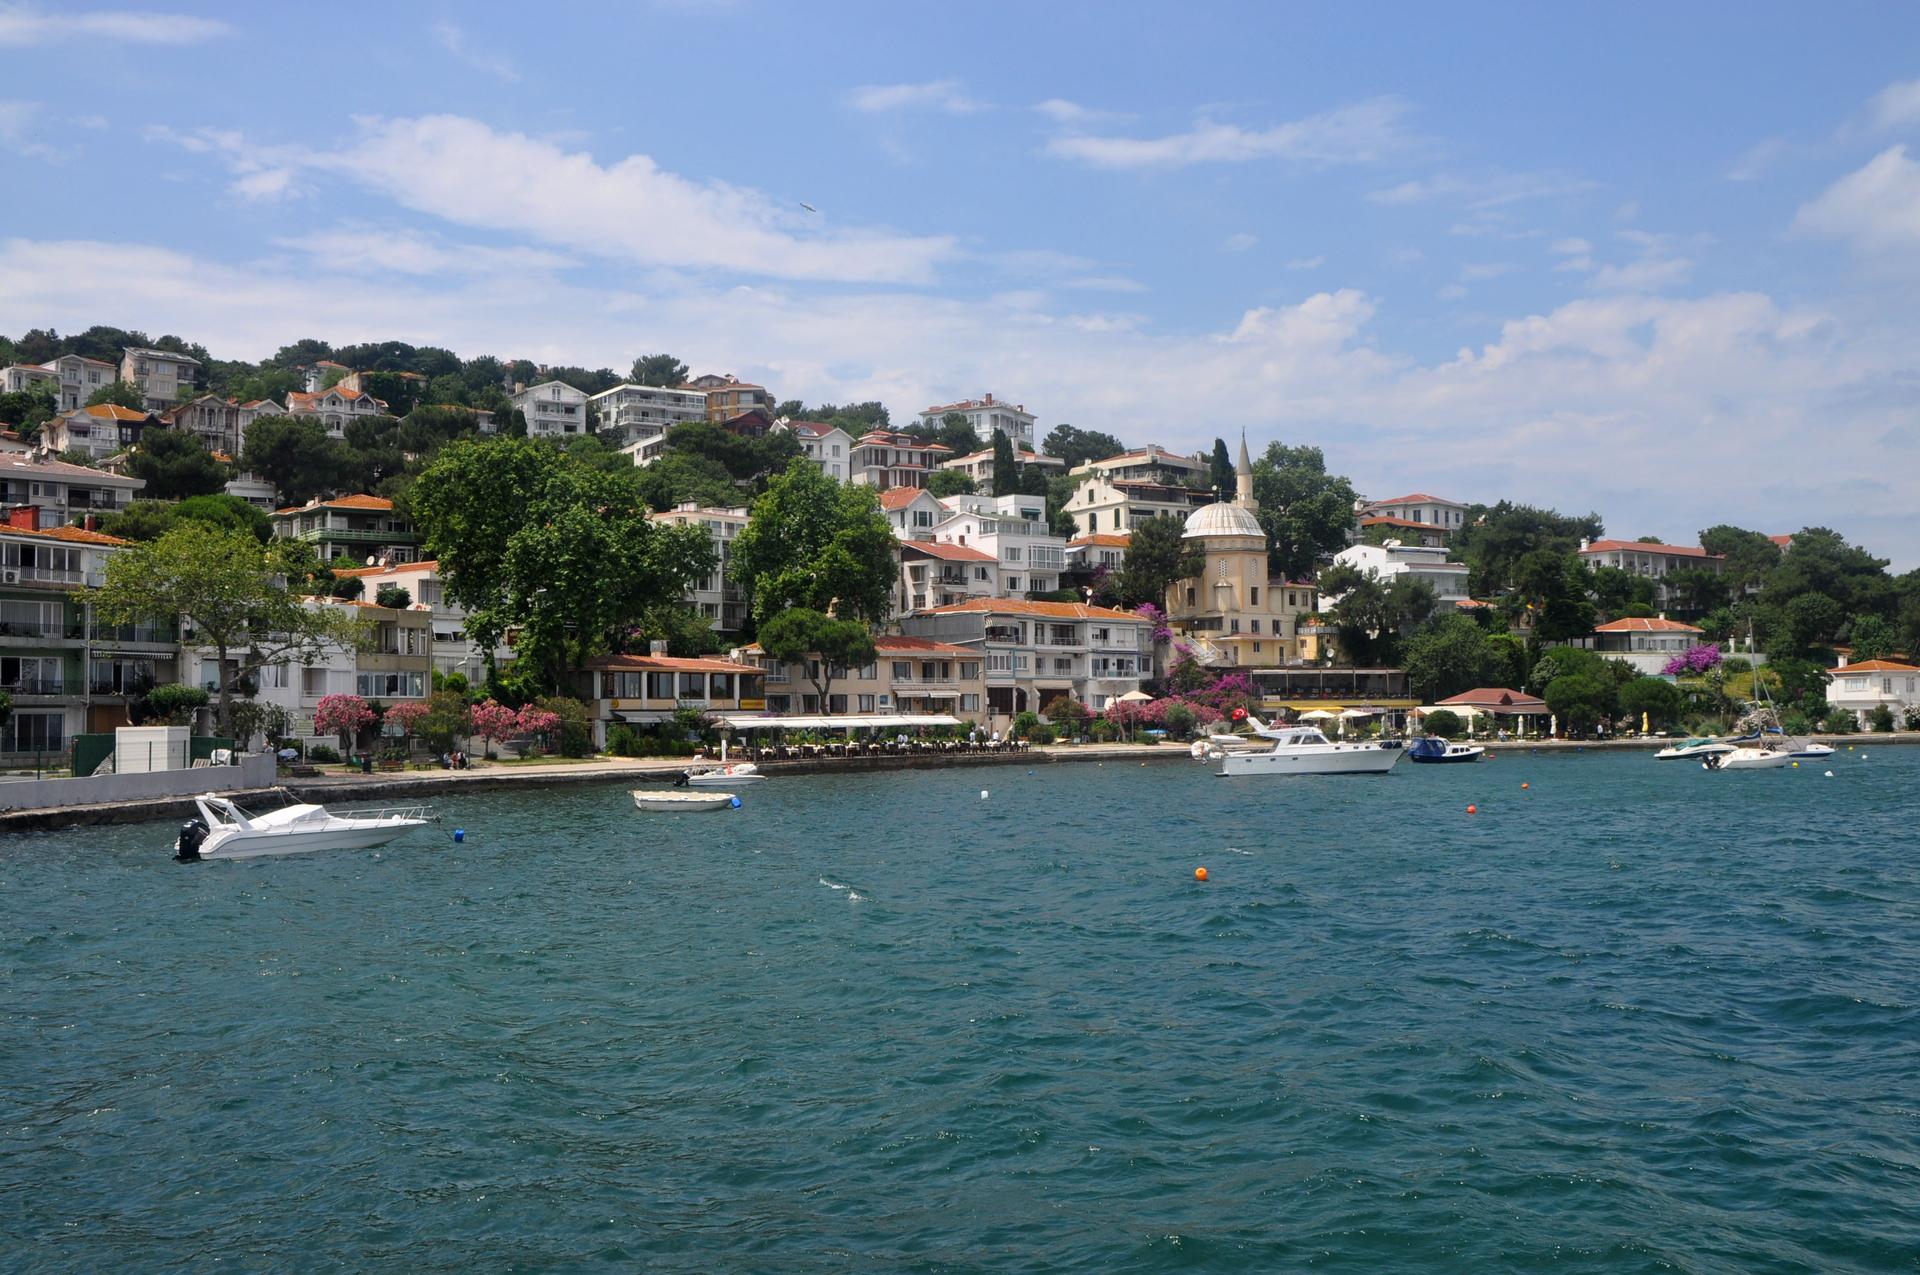 The island of Büyükada in the Marmara Sea, a popular summer destination for Turkish residents and tourists alike. The sea snot outbreak this summer closed beaches for swimming and turned many off from a local specialty, grilled fish. 